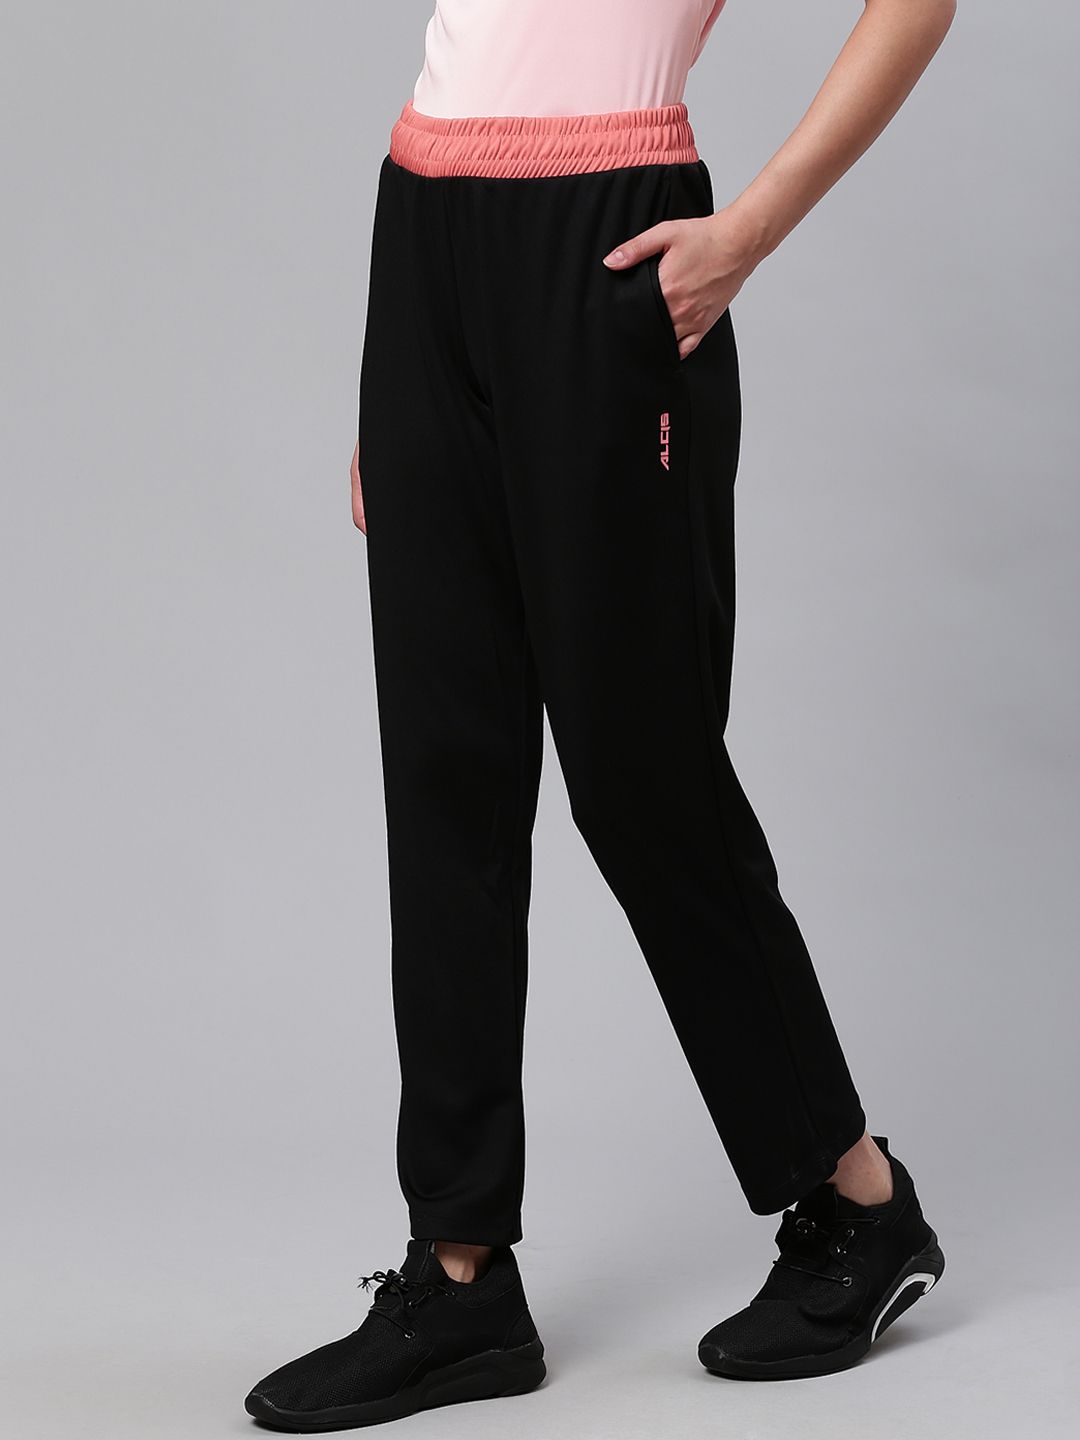 Alcis Women Black Slim Fit Solid Training or Gym Track Pants Price in India